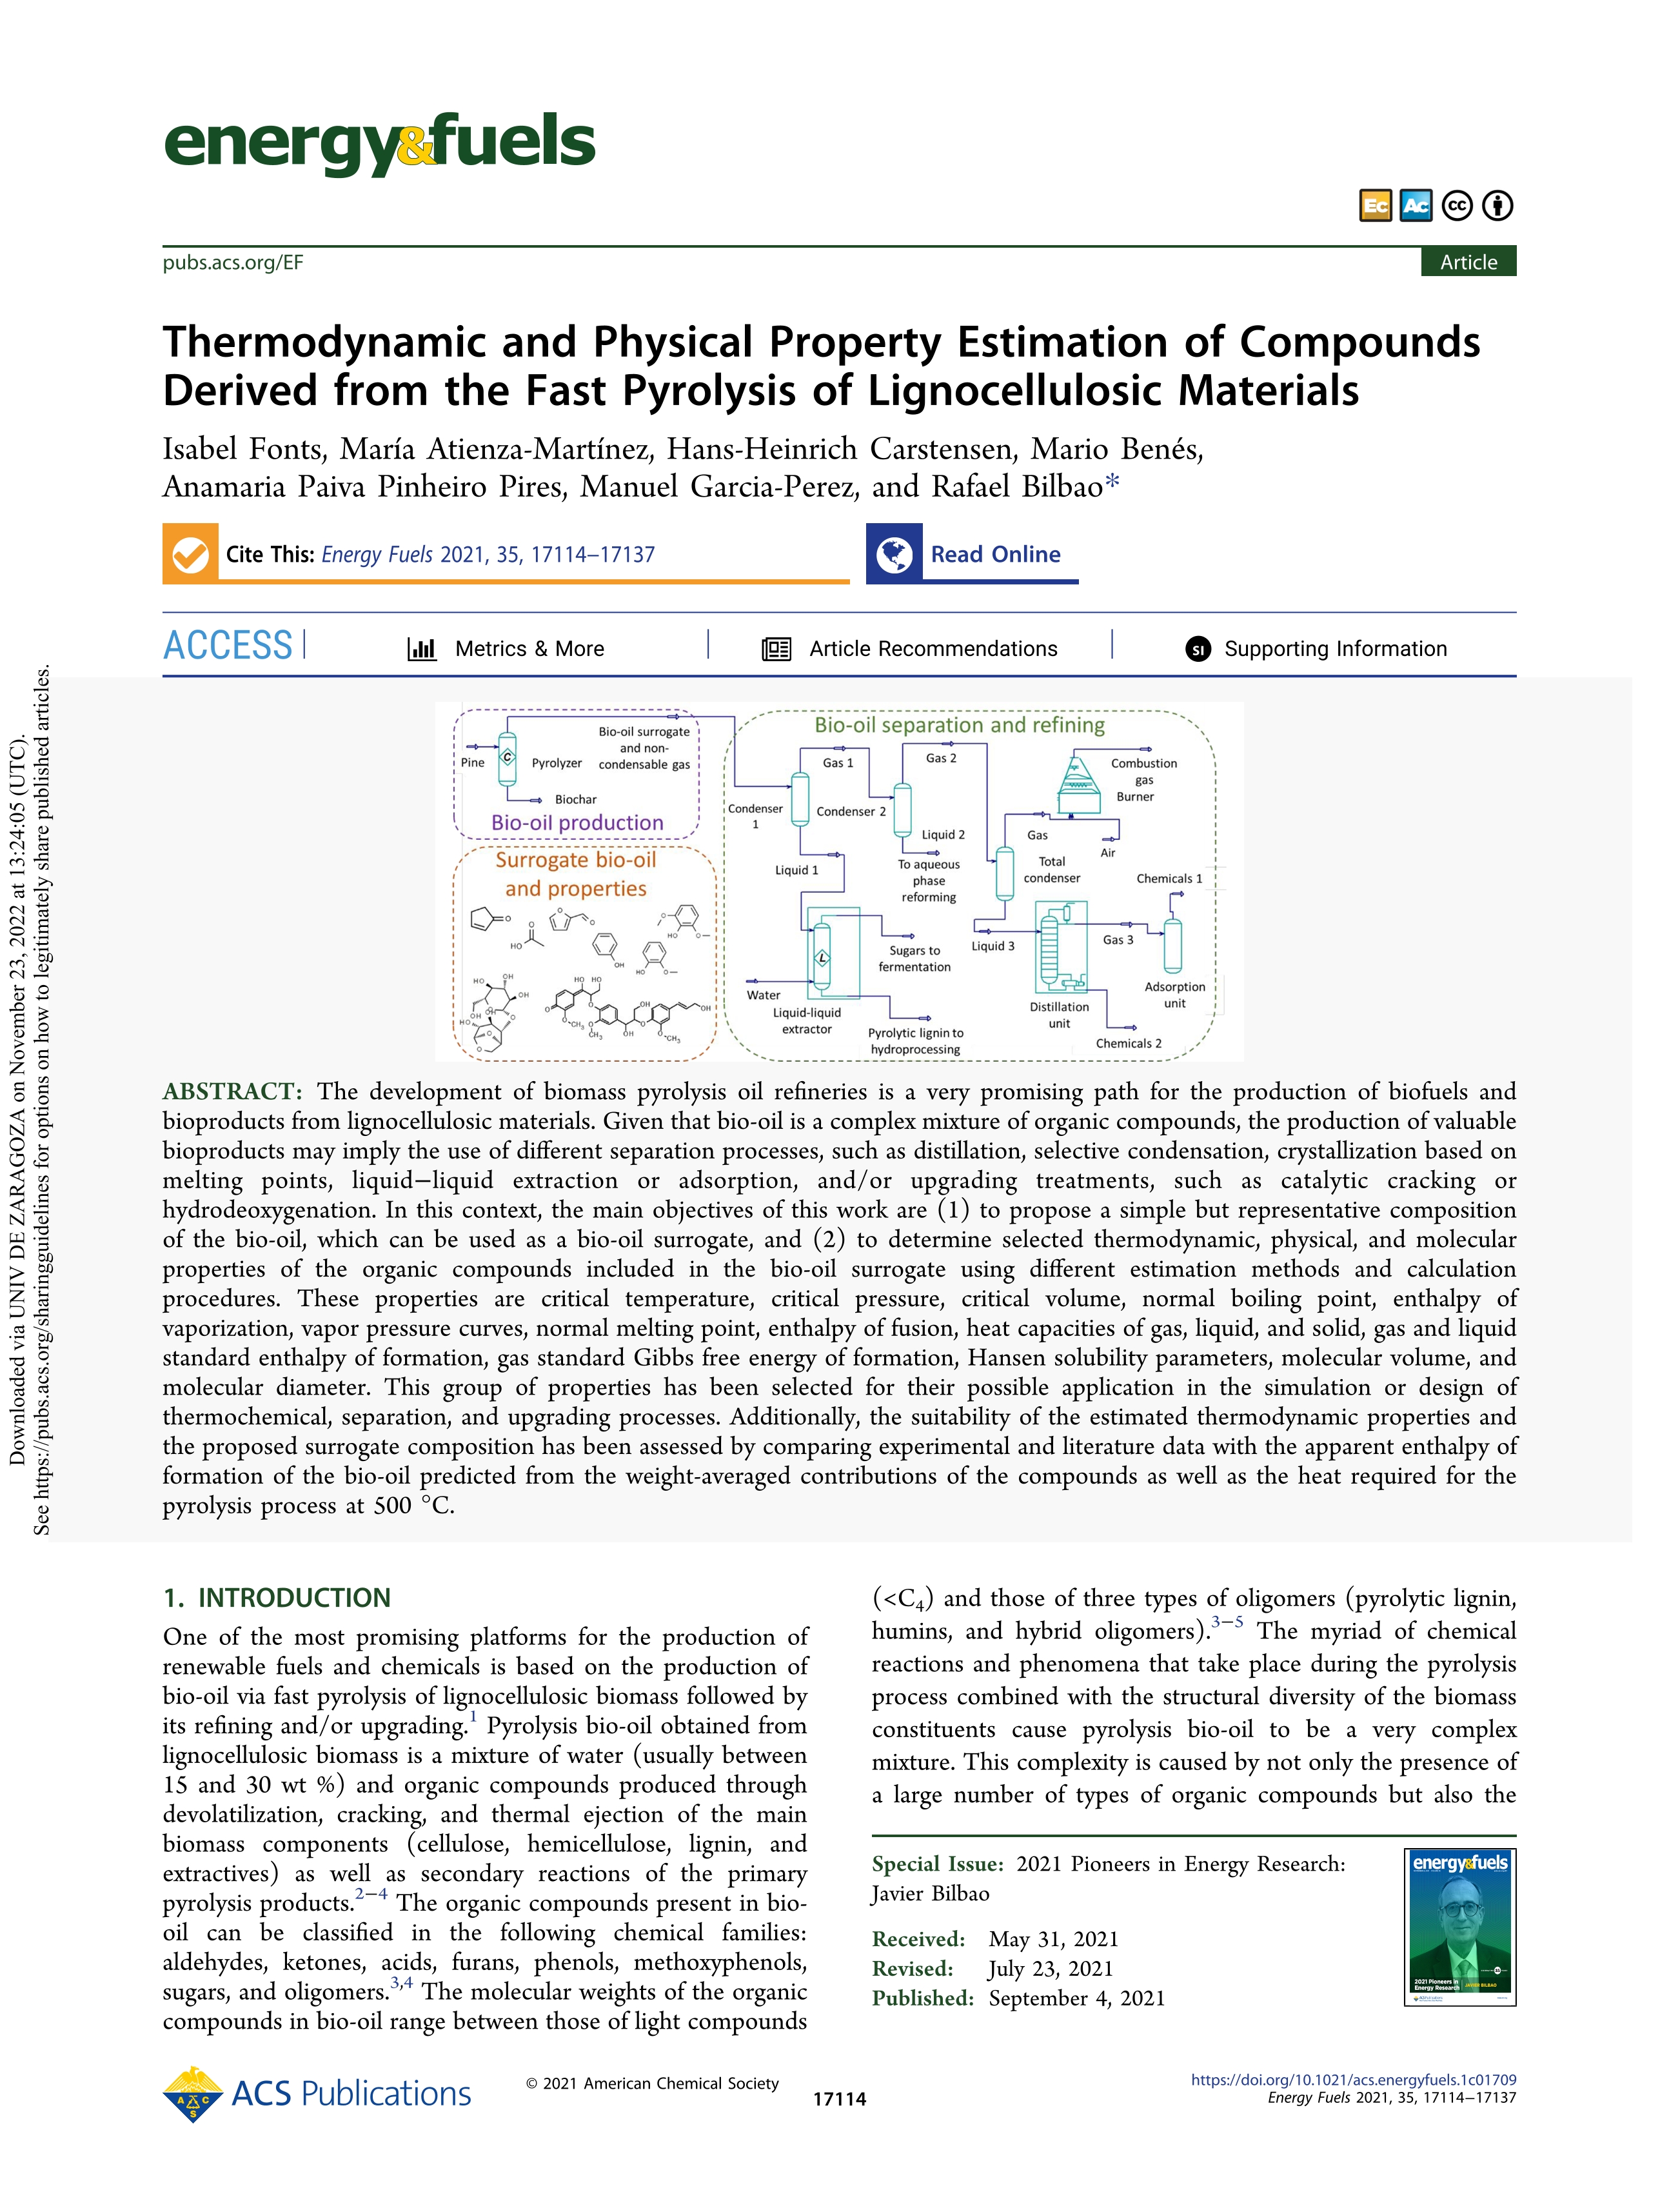 Thermodynamic and physical property estimation of compounds derived from the fast pyrolysis of lignocellulosic materials